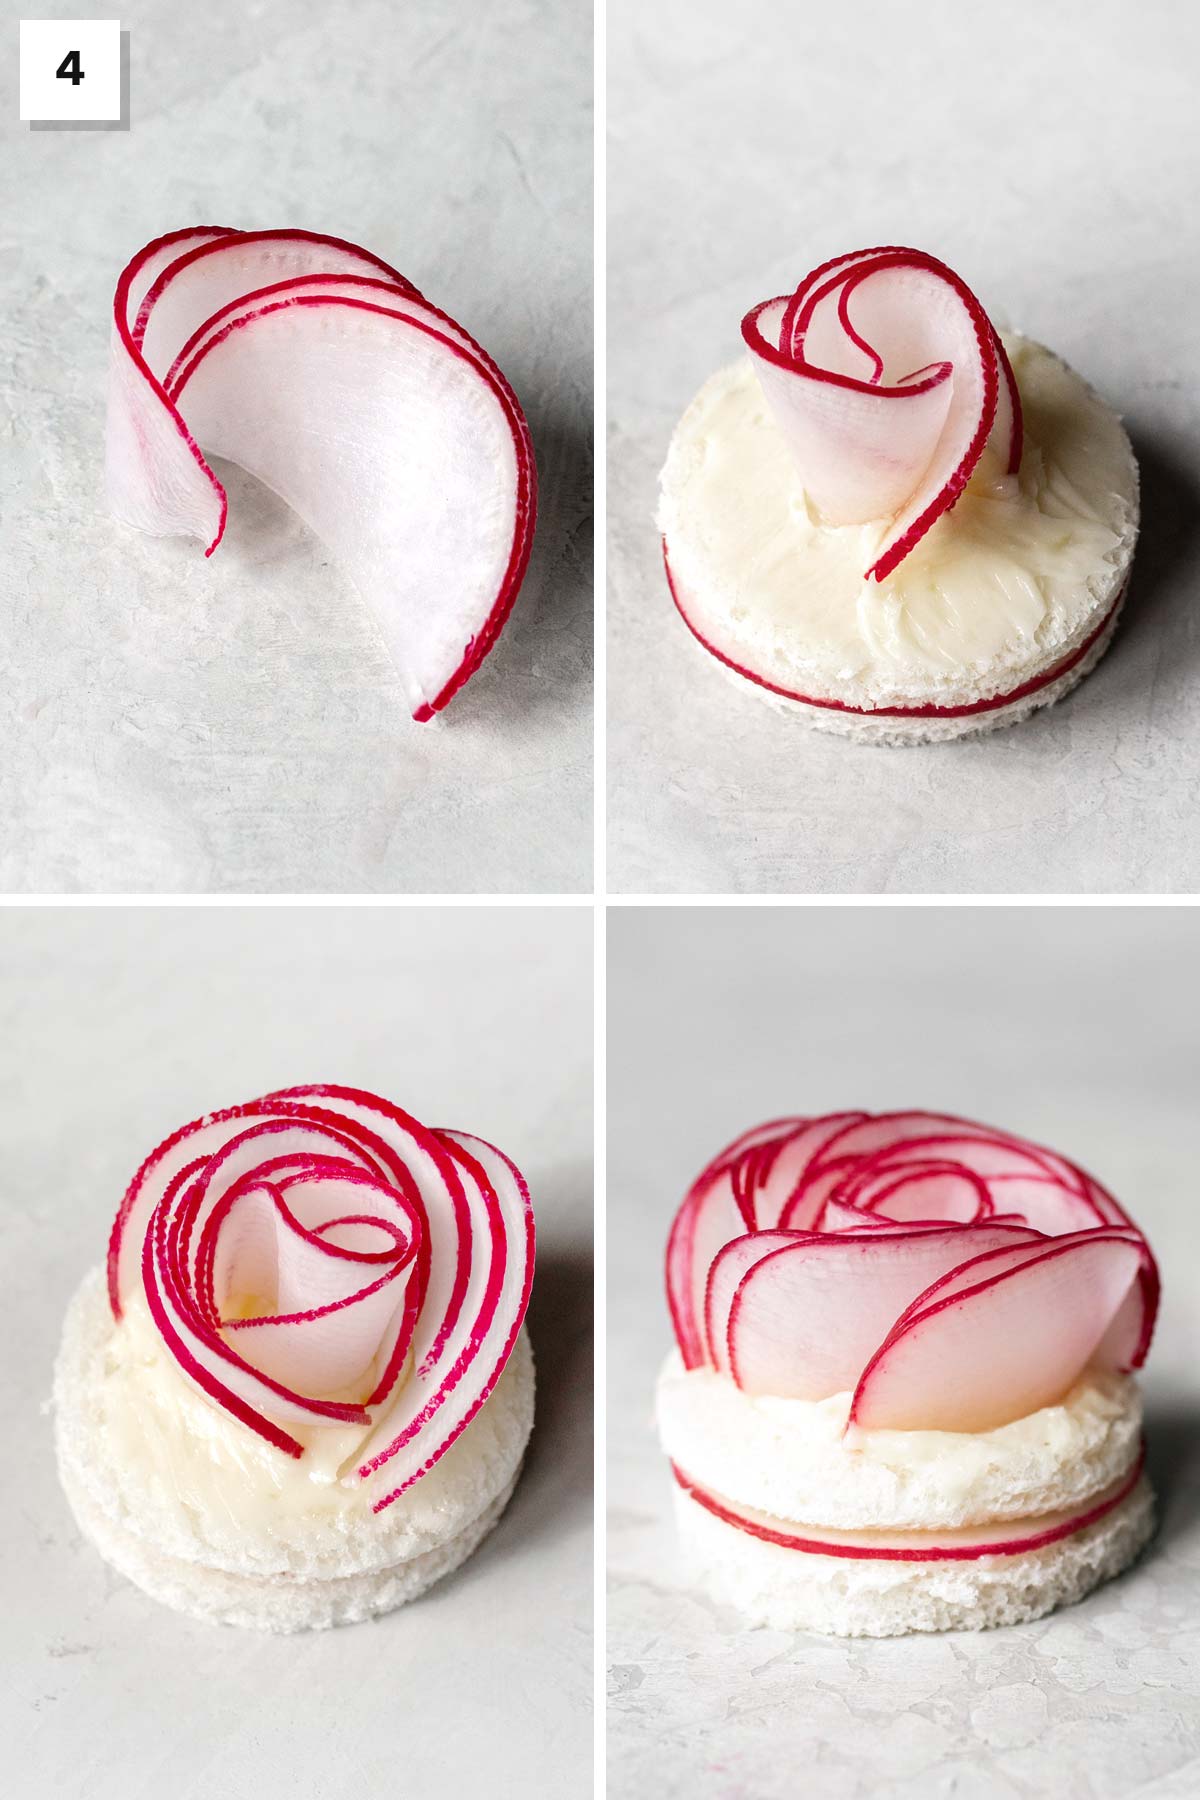 Four photo collage showing steps to make a radish rose tea sandwich.